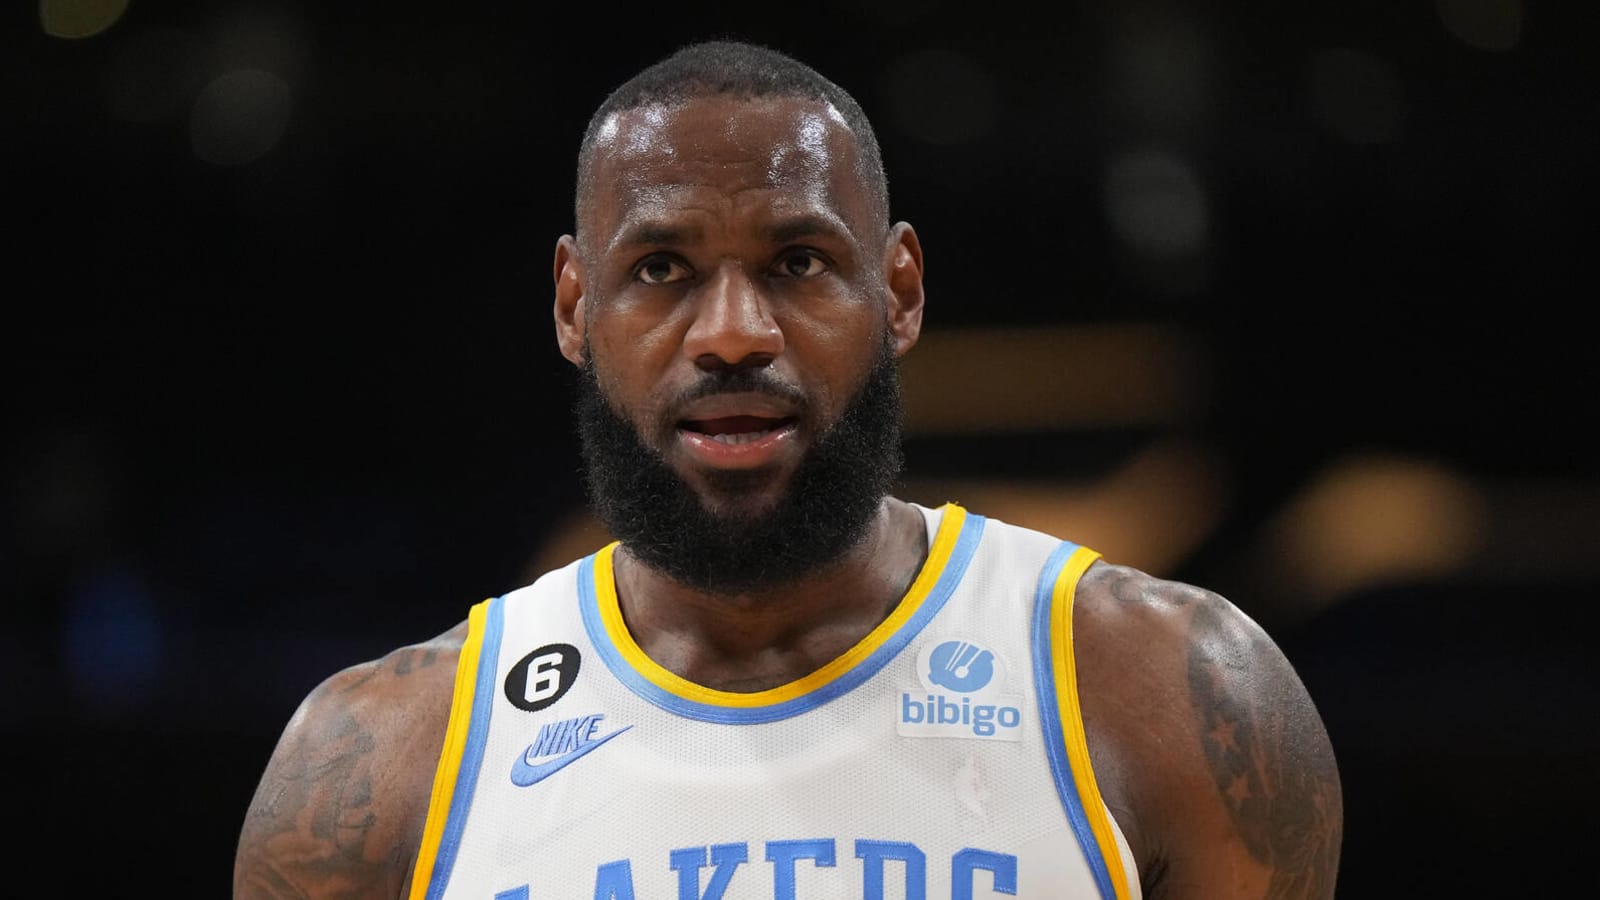 Concerning report emerges about LeBron James’ foot injury